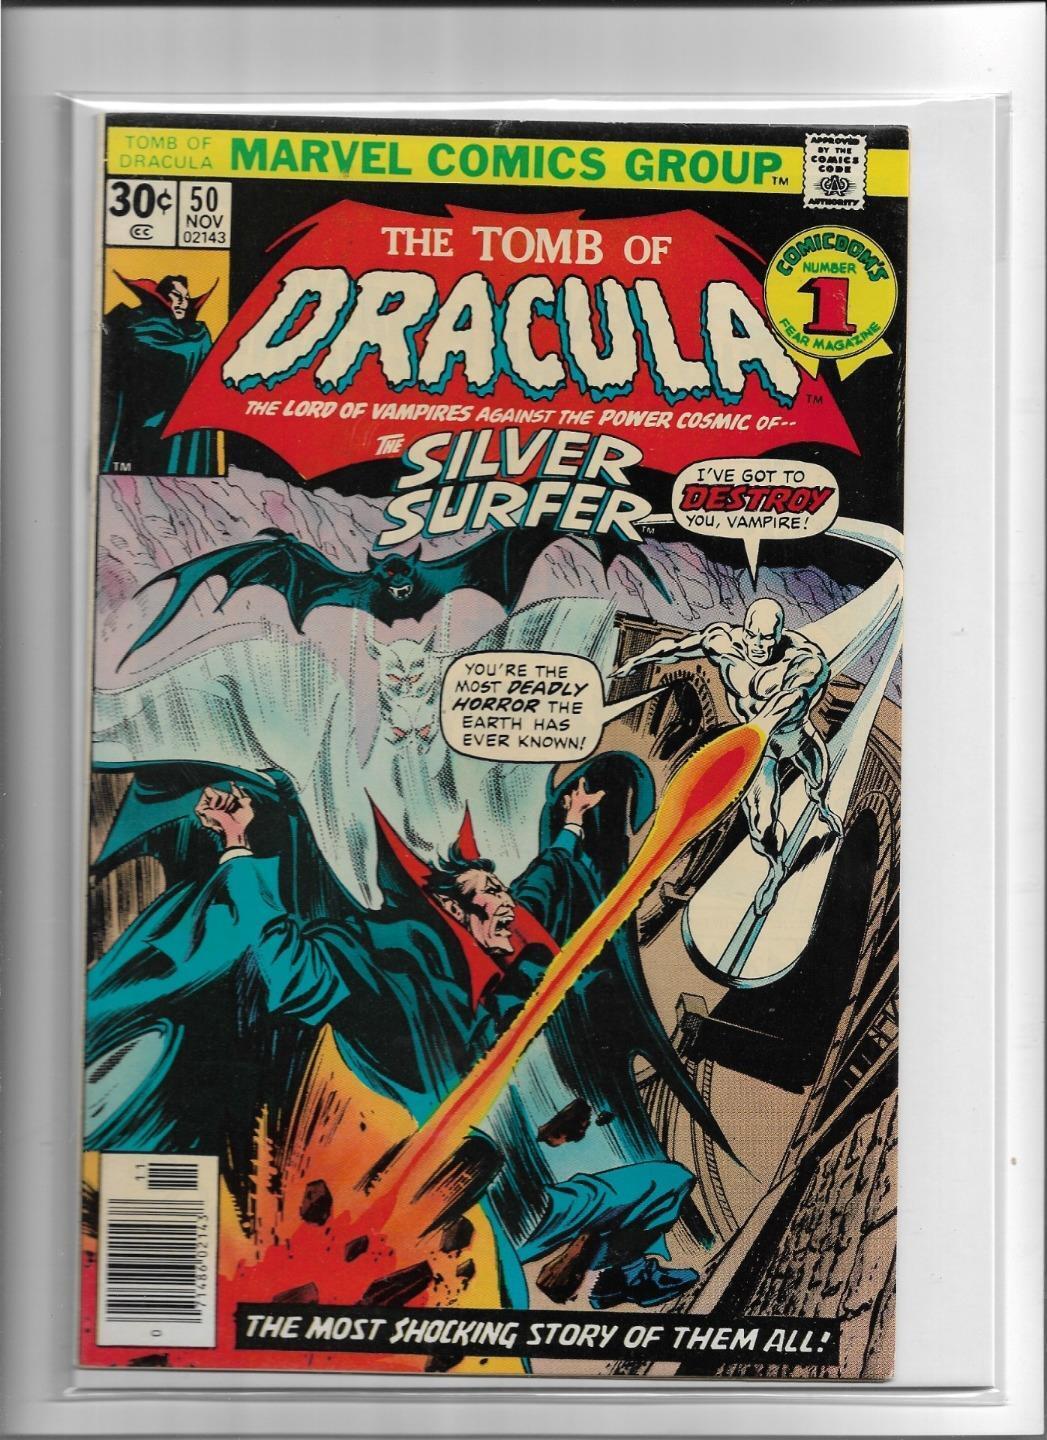 TOMB OF DRACULA #50 1976 VERY FINE+ 8.5 3550 SILVER SURFER